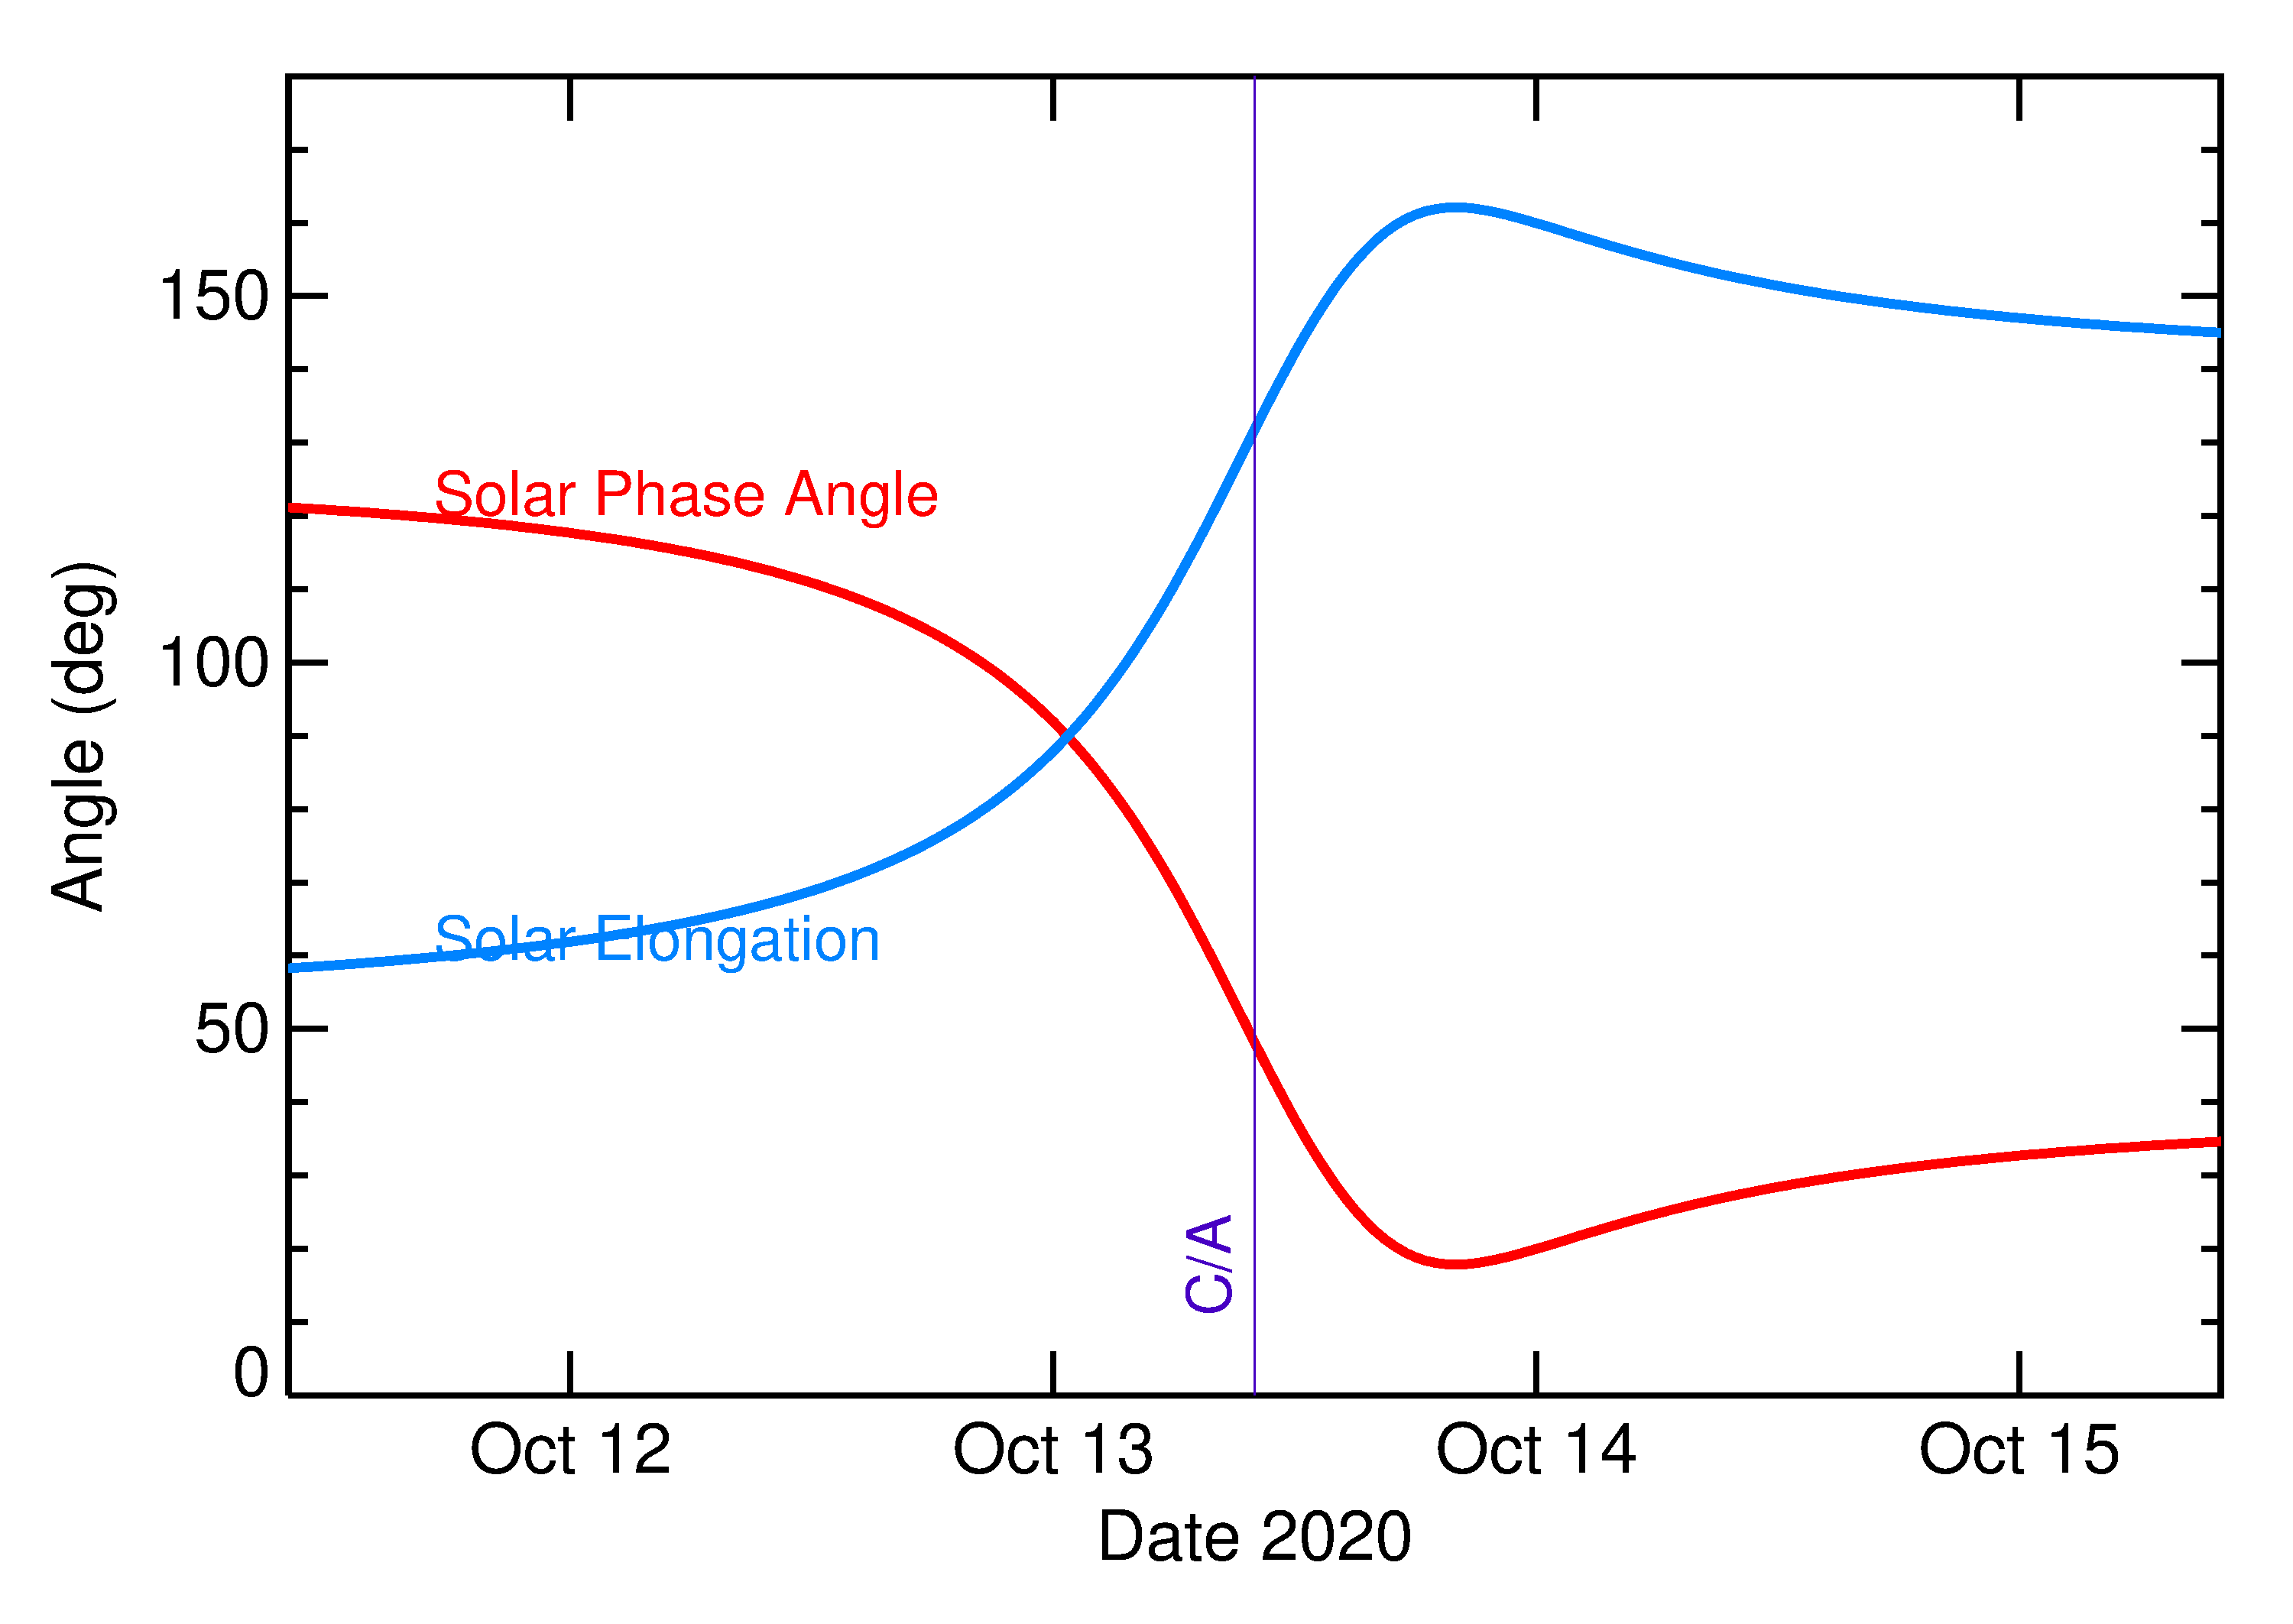 Solar Elongation and Solar Phase Angle of 2020 TD7 in the days around closest approach